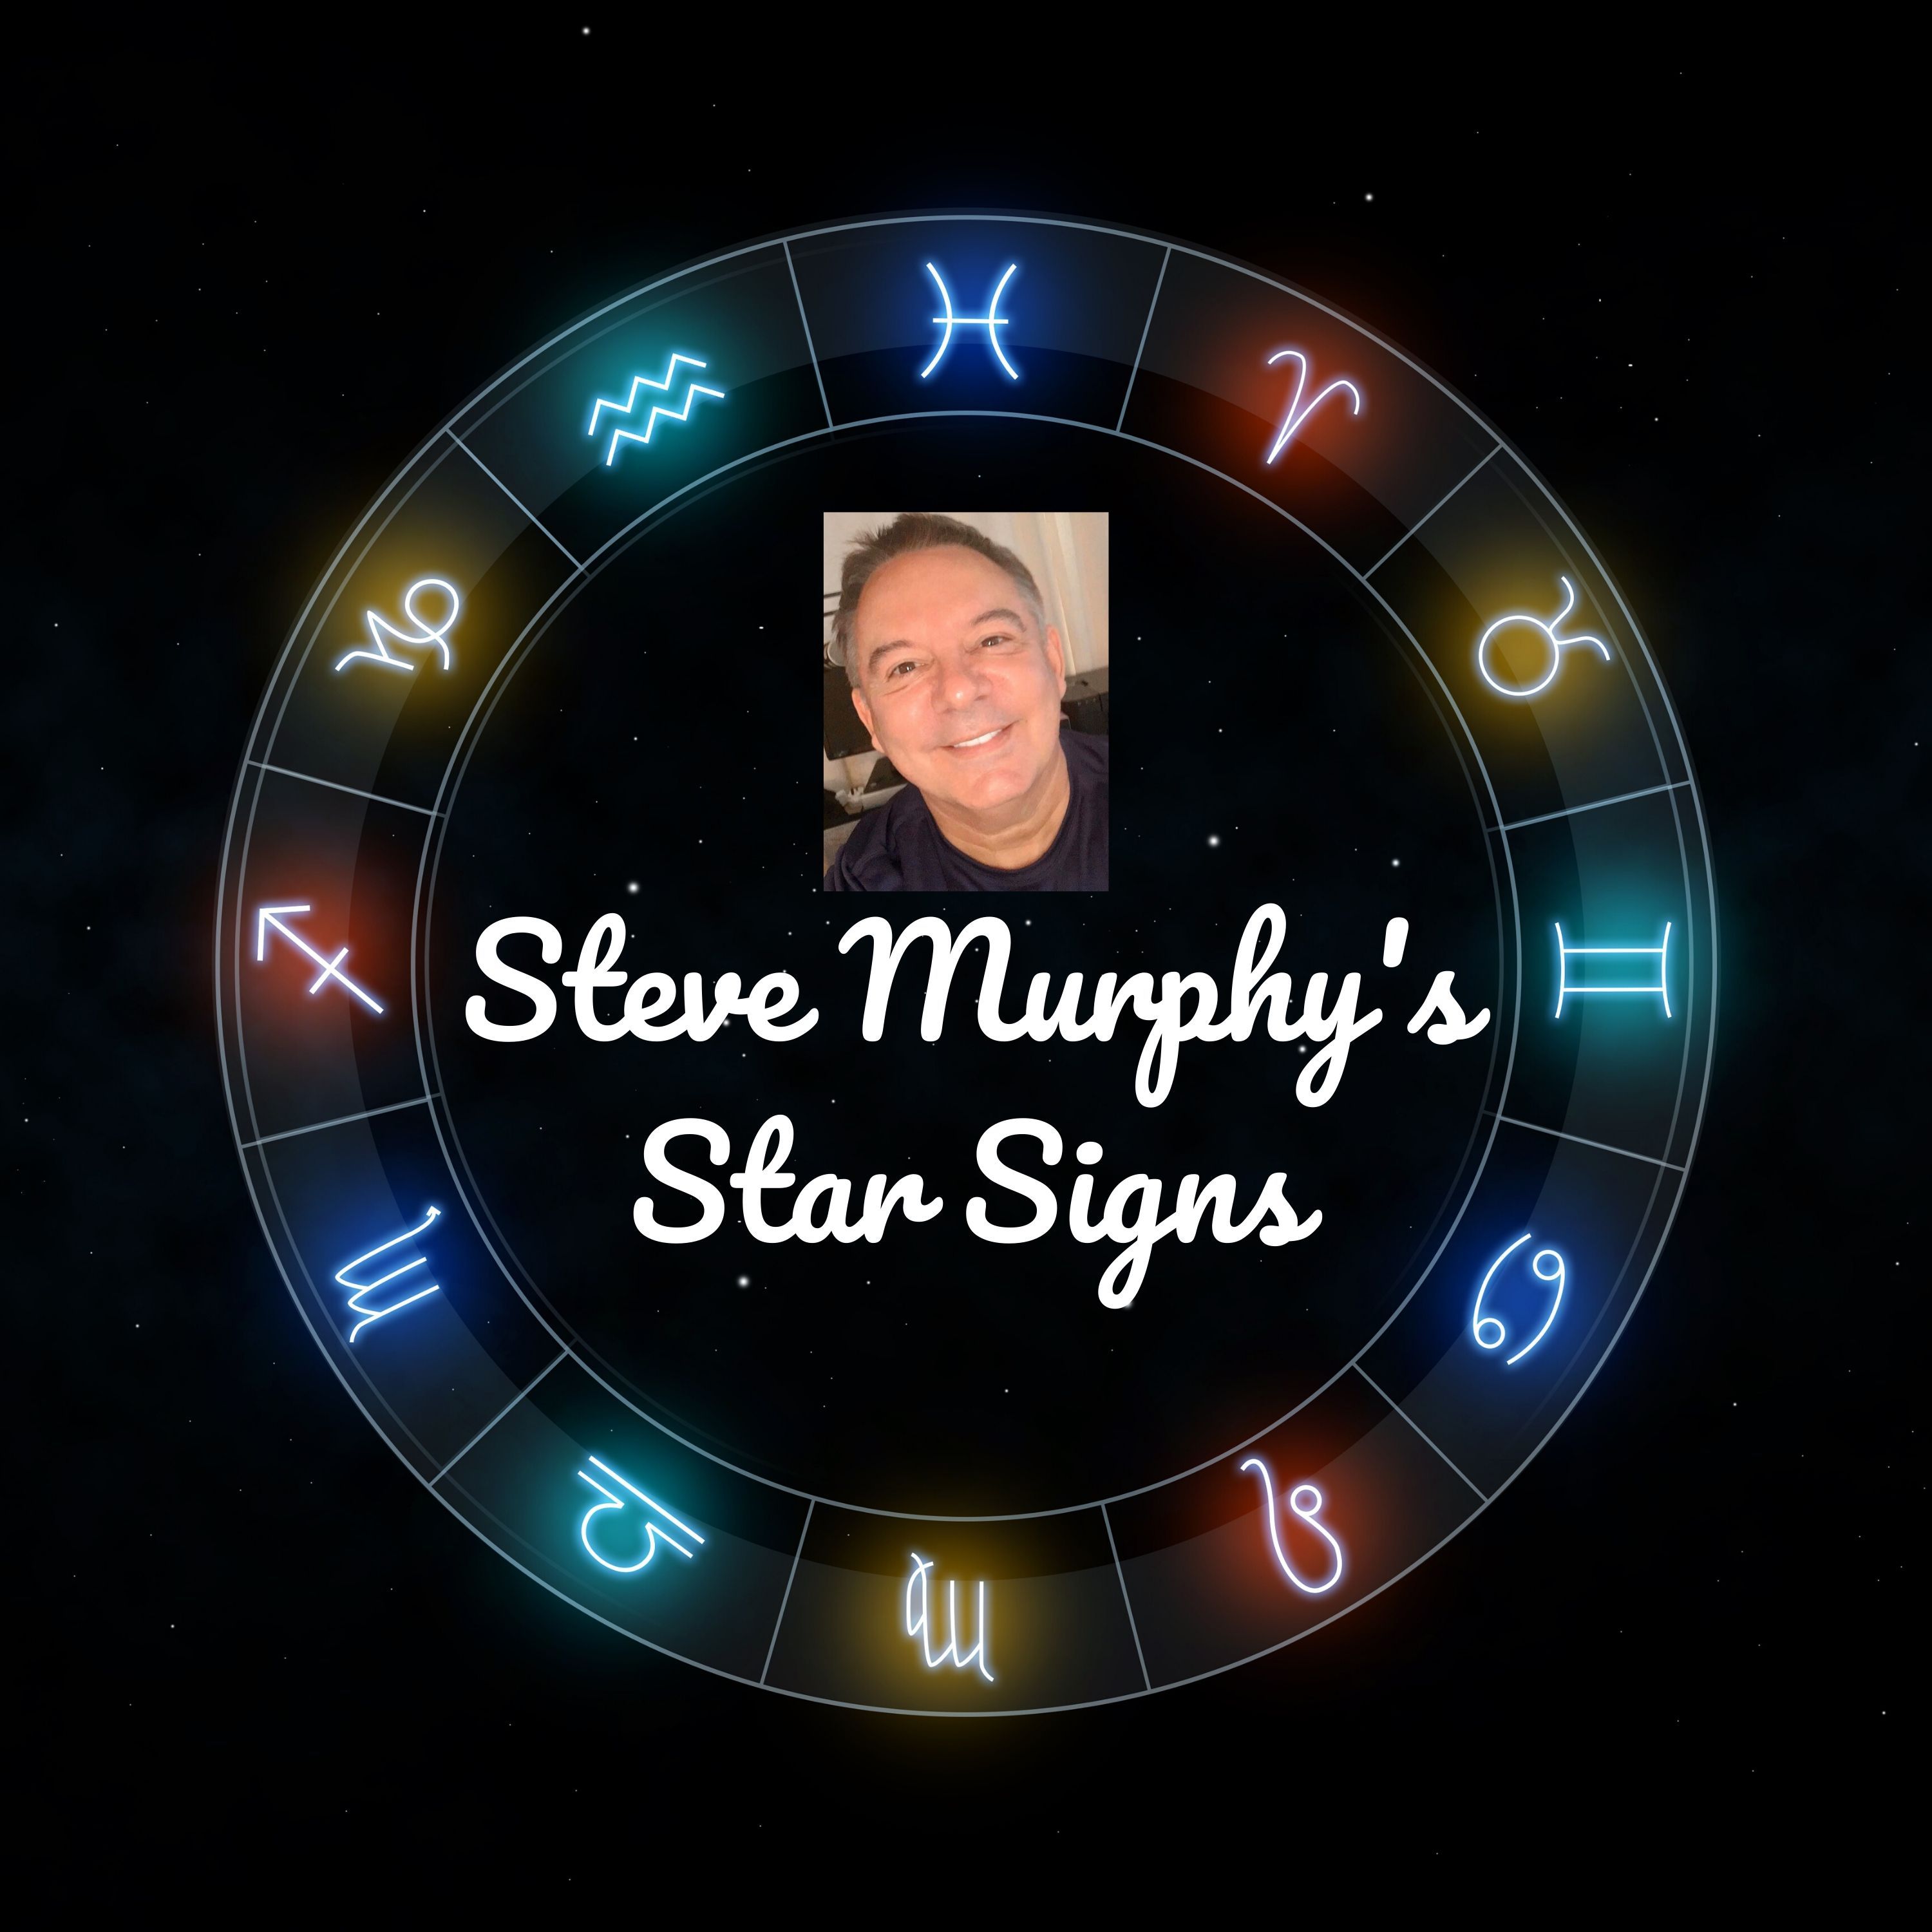 Your Star Signs Report wc 15th June 2020